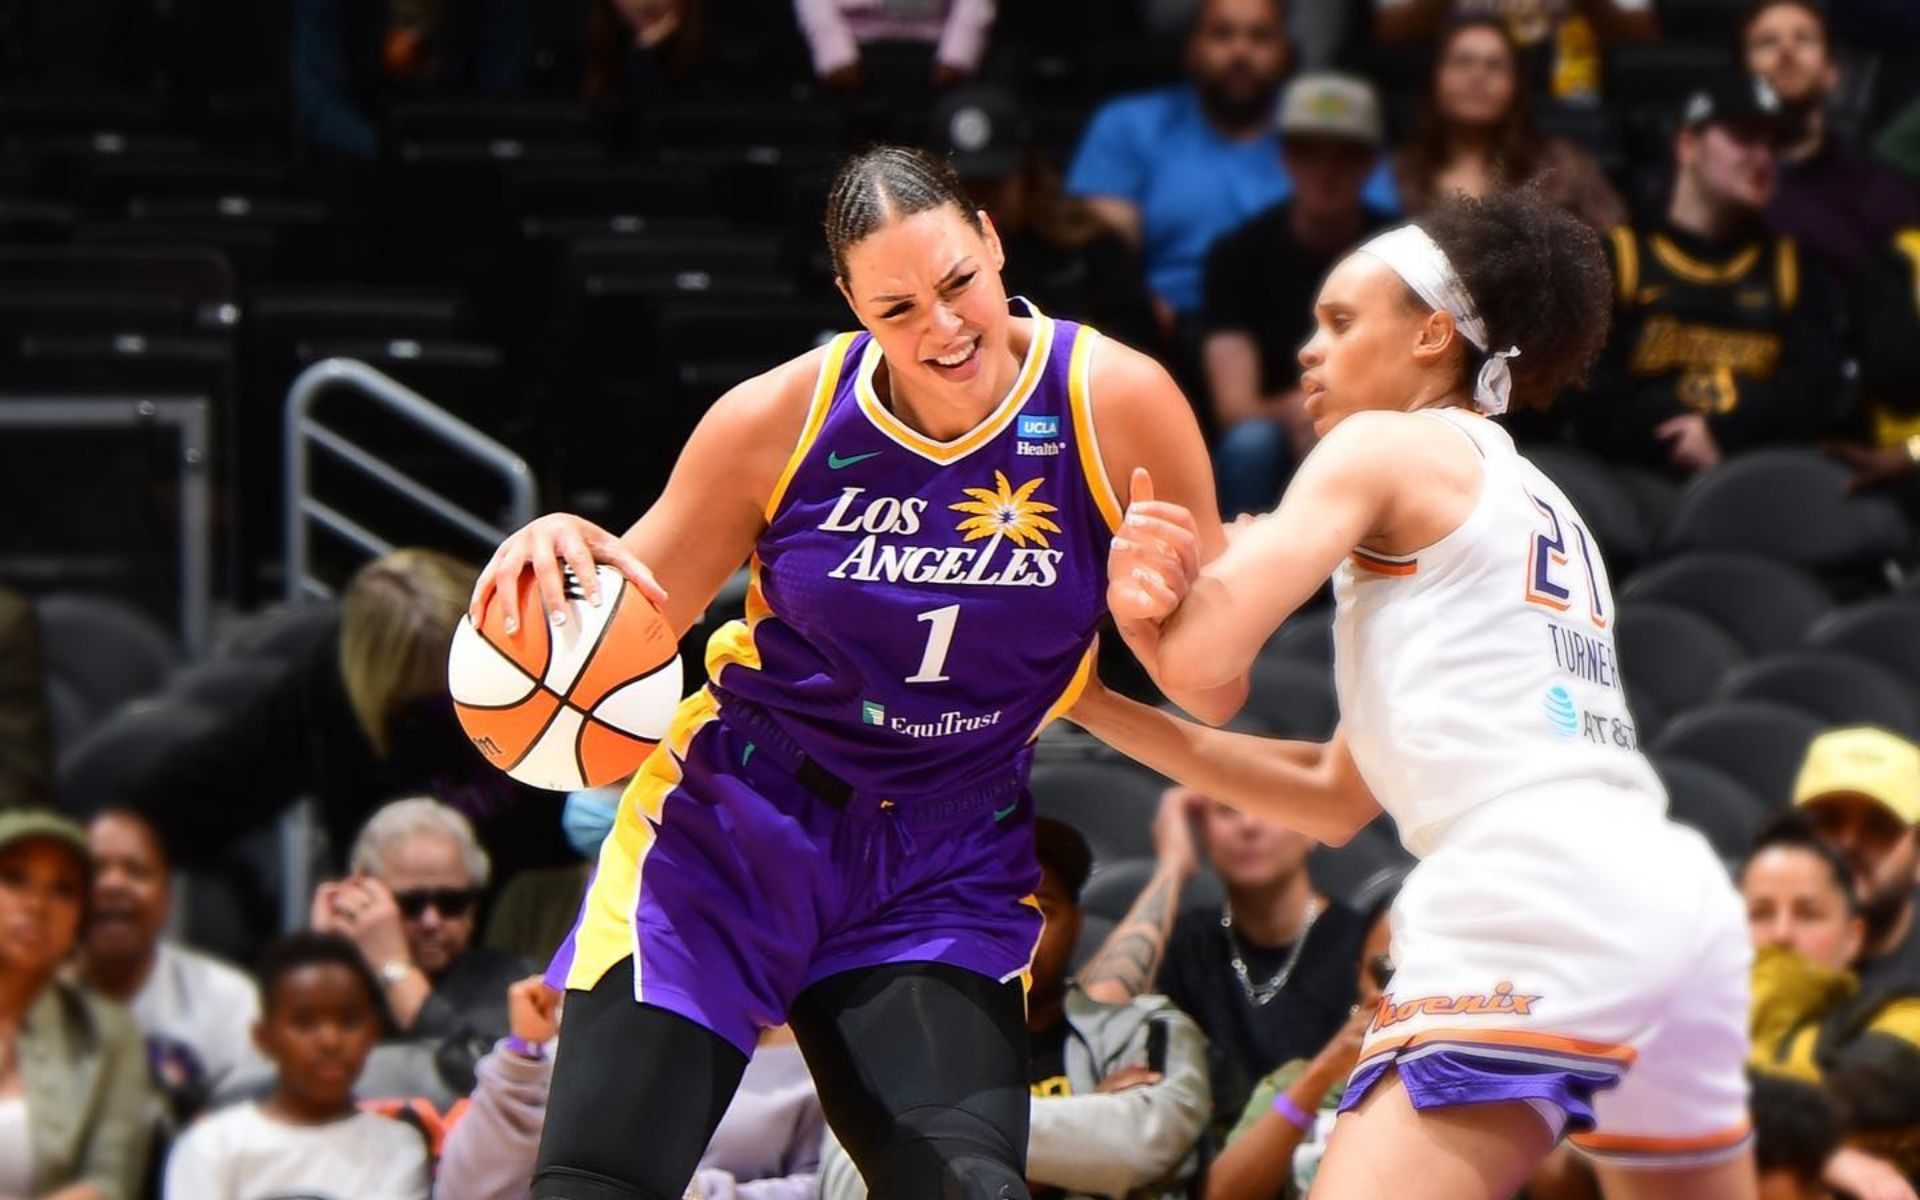 All-Star Liz Cambage to ‘step away’ from WNBA following LA Sparks departure